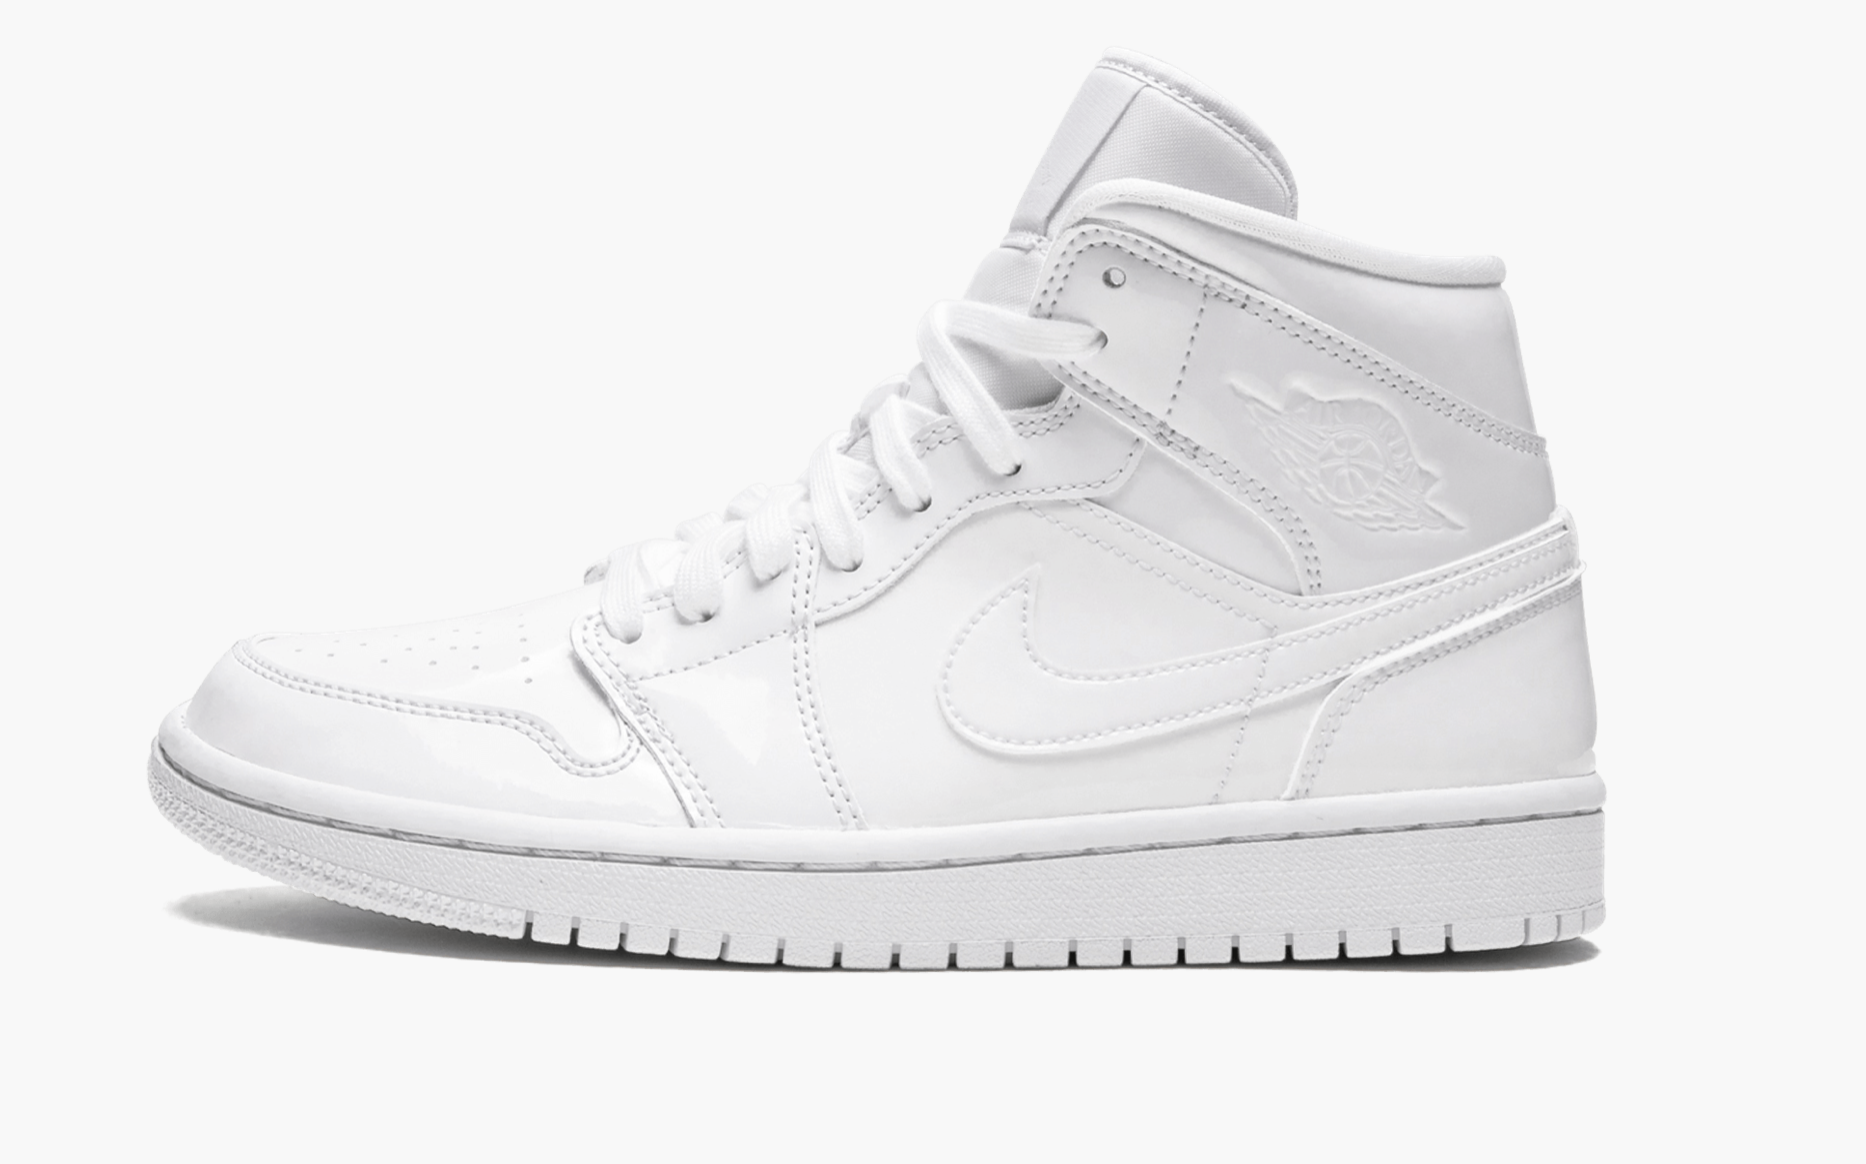 WMNS Air Jordan 1 Mid  “Triple White Patent Leather” - whatever on 